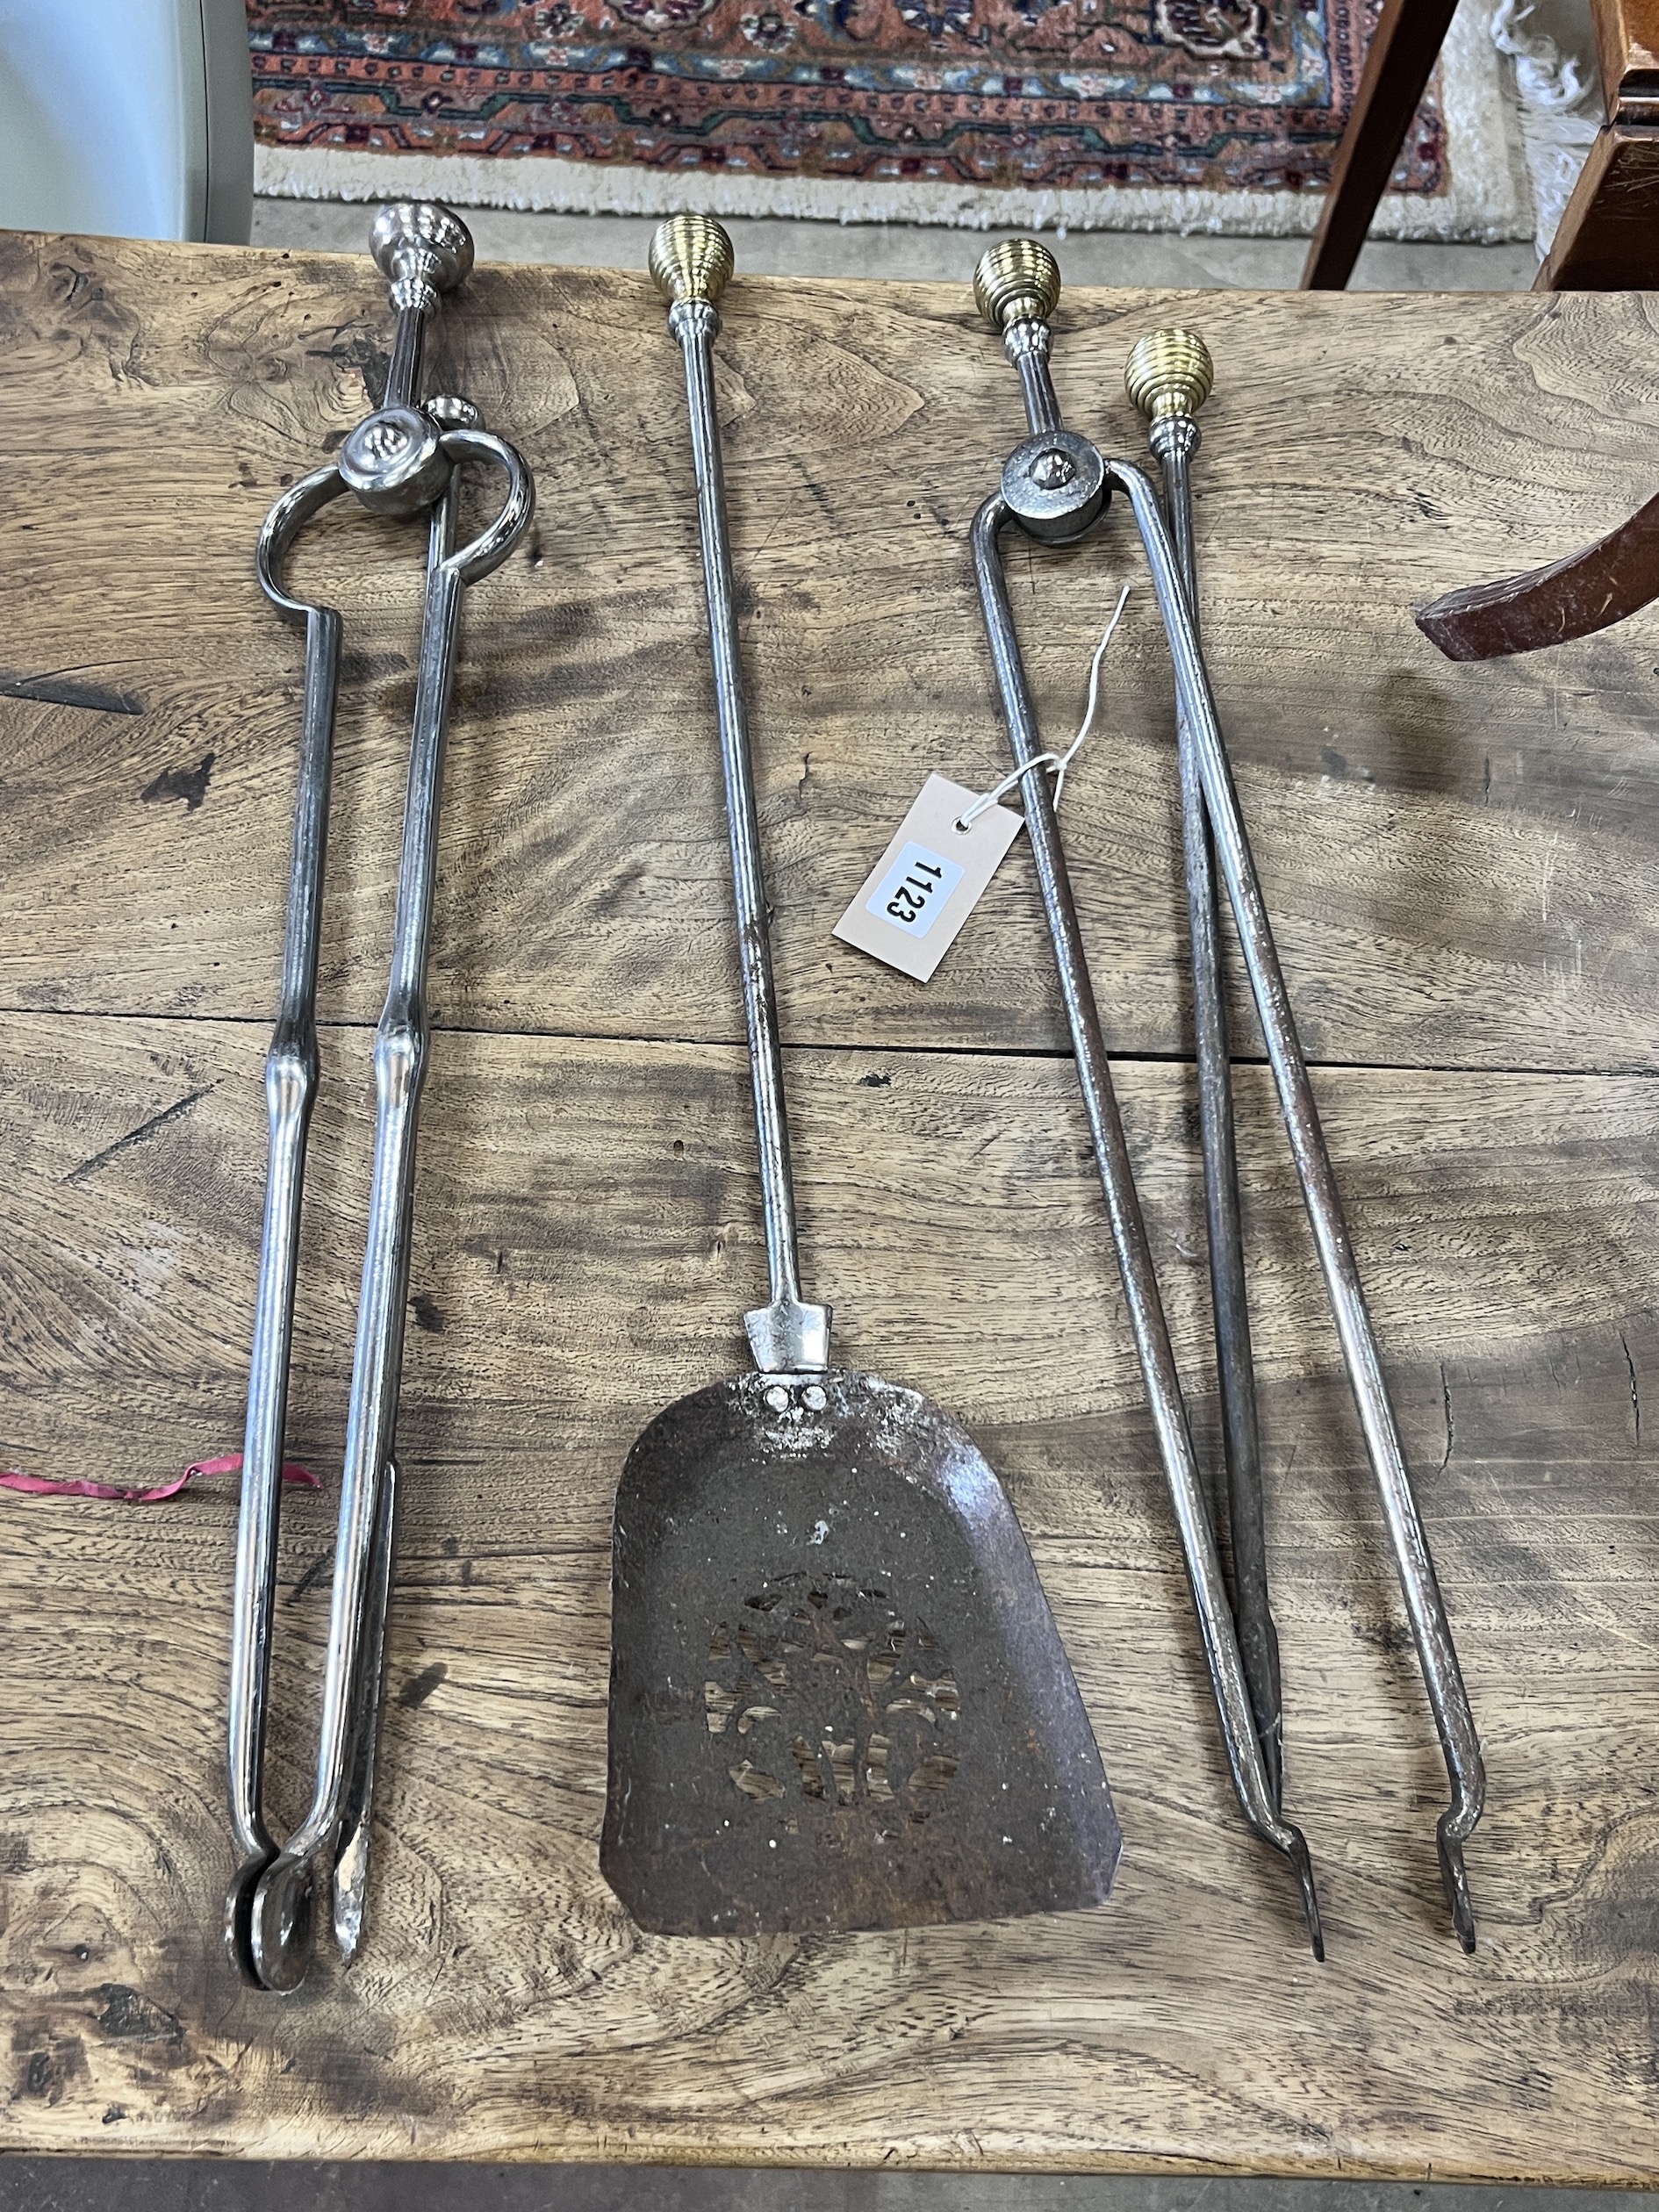 A set of three brass mounted steel fire implements together with a pair of tongs and a poker